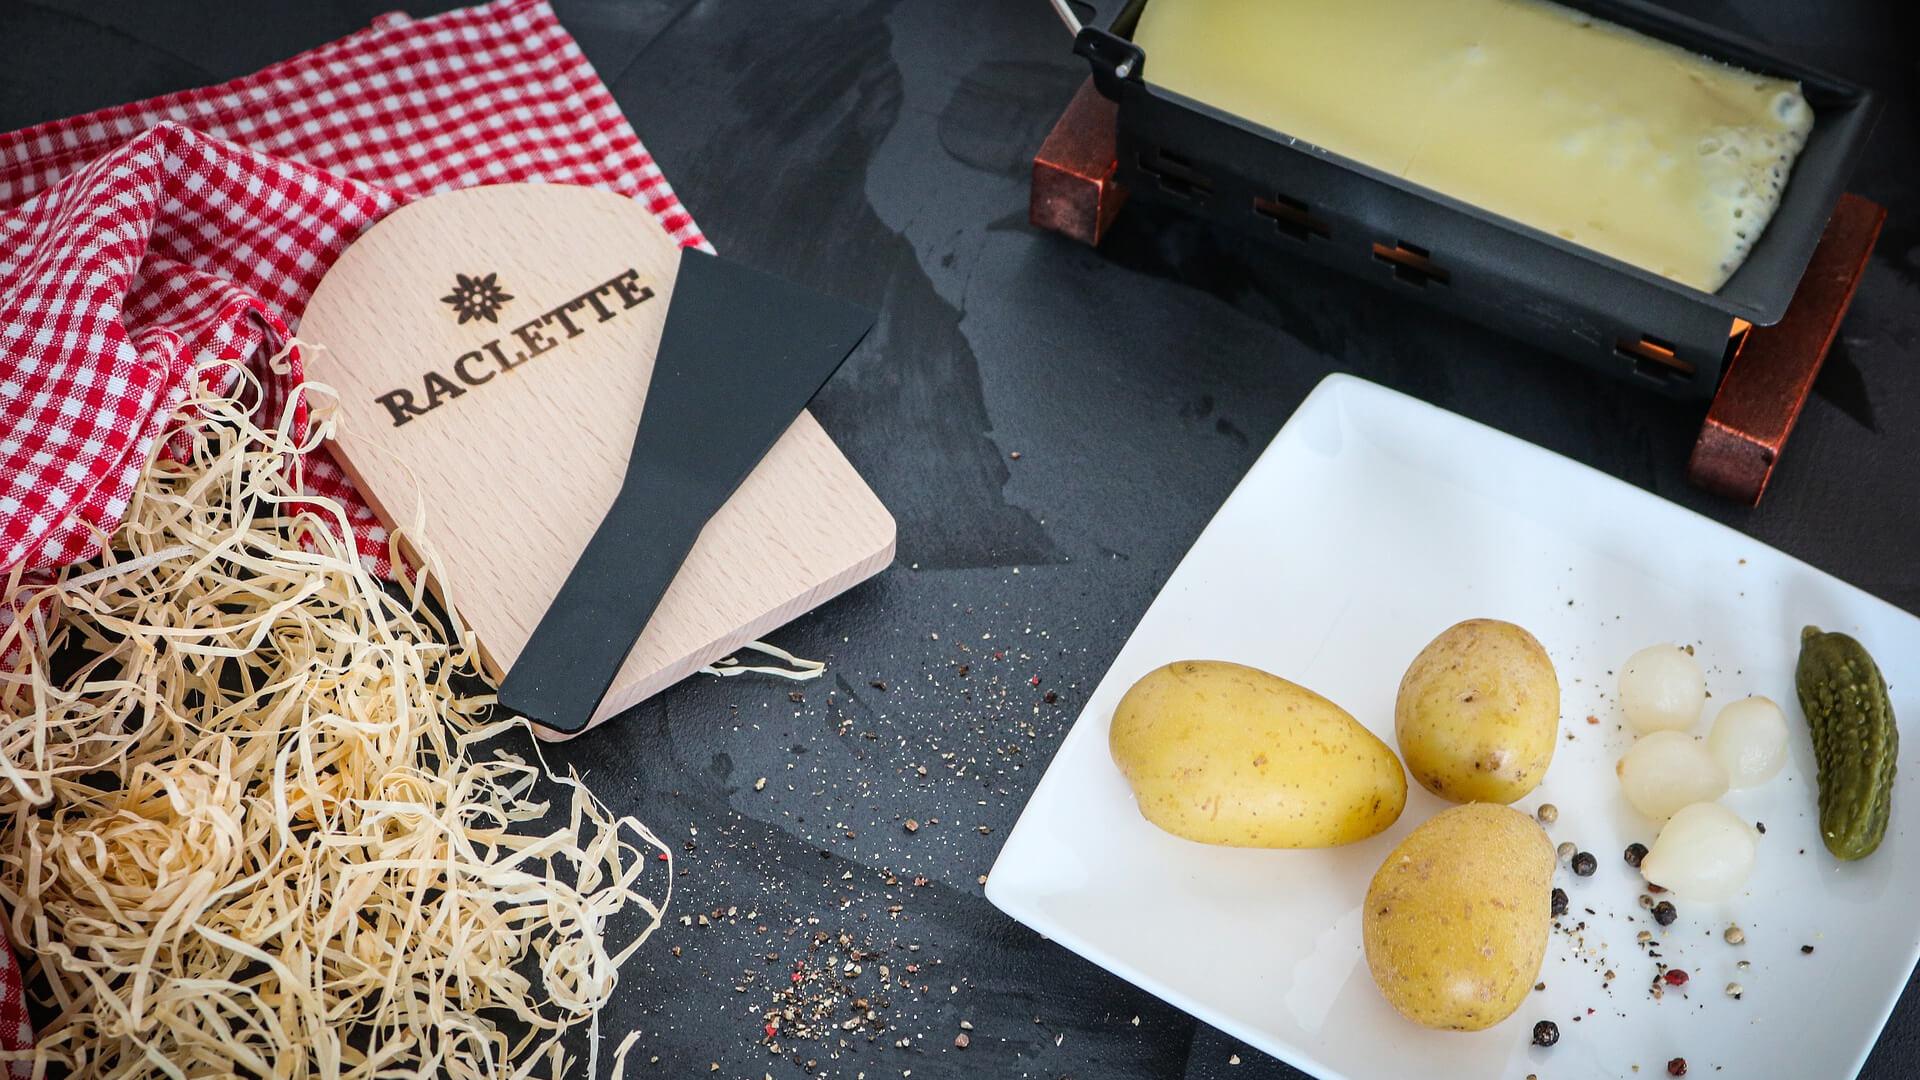 Raclette are perfect for Winter times in Switzerland